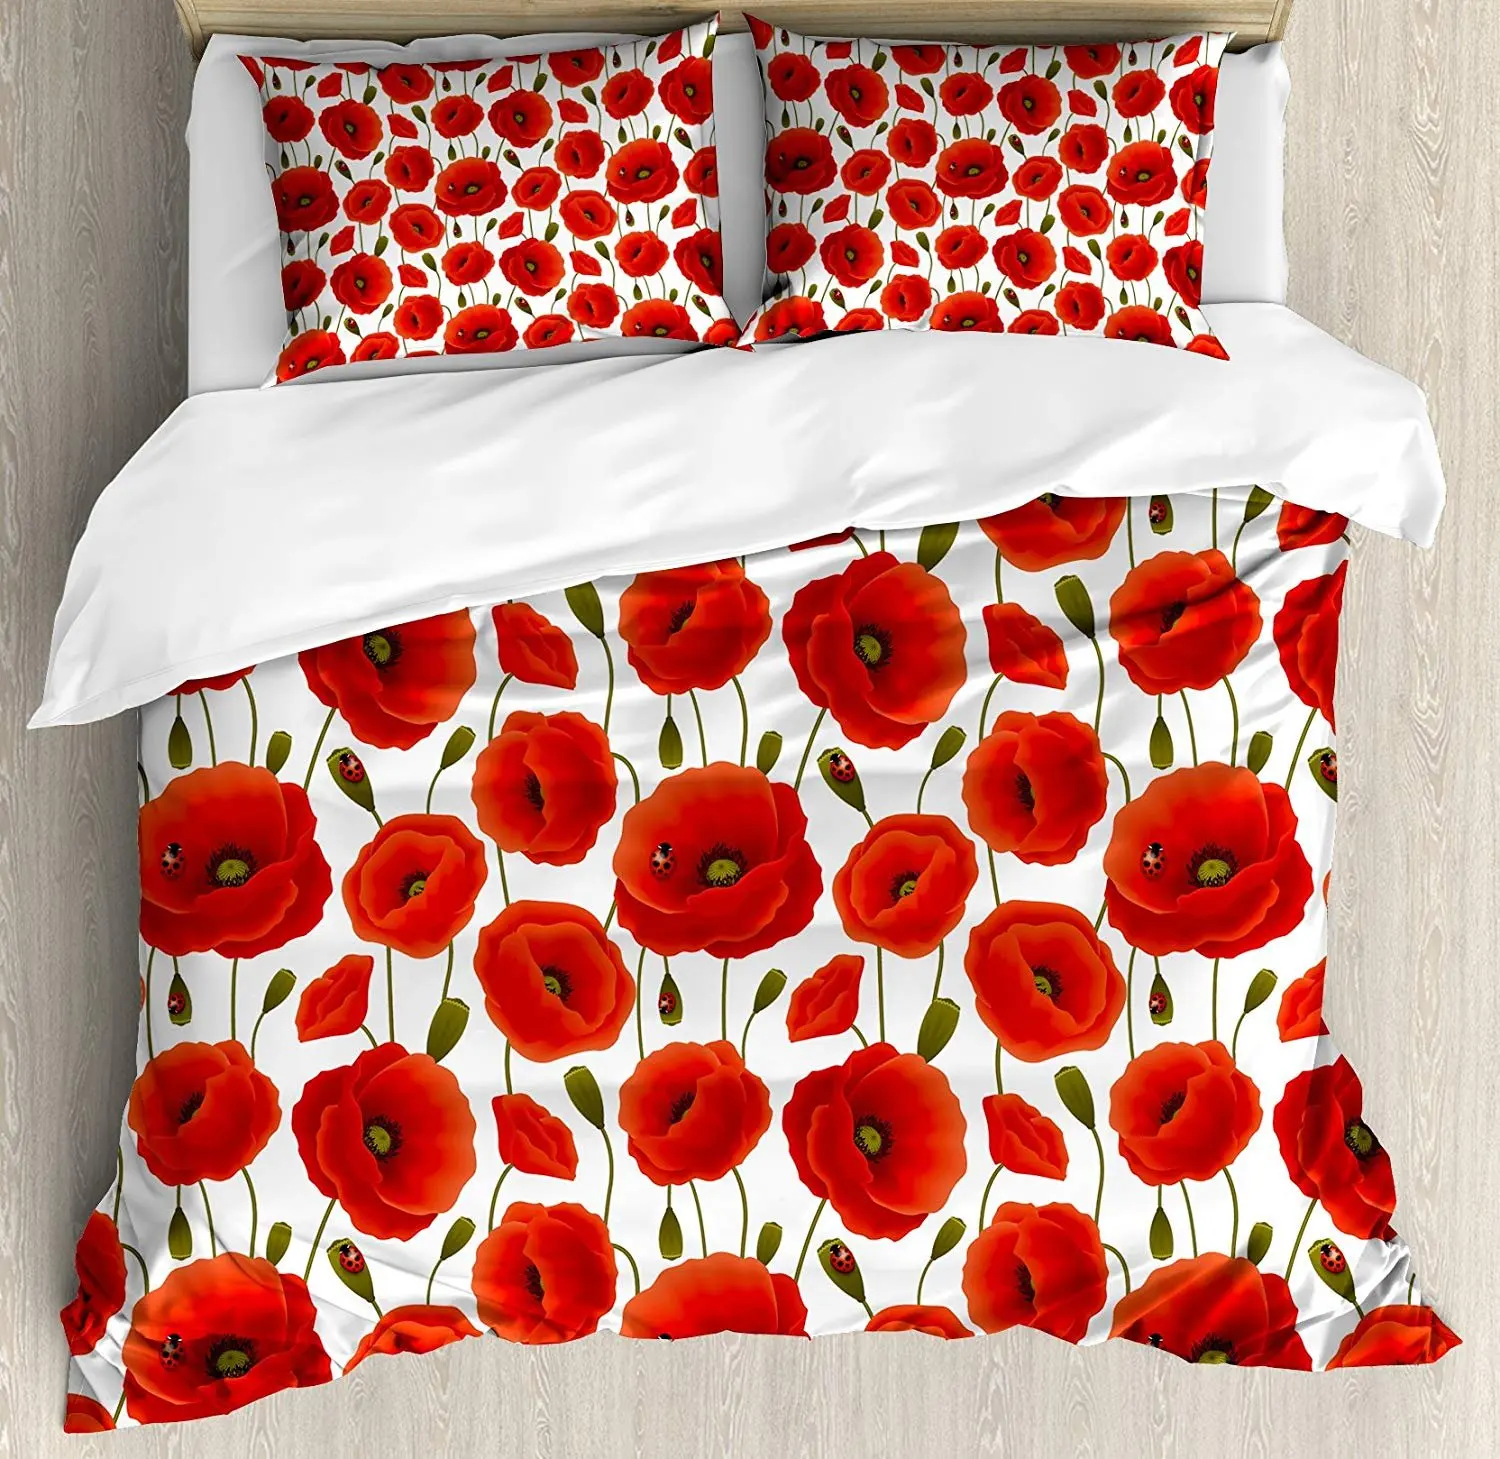 

Poppy Bedding Set Spring Flowers with Ladybugs Animals and Plants Flora and Fauna Nature Duvet Cover Set Pillowcase for Home